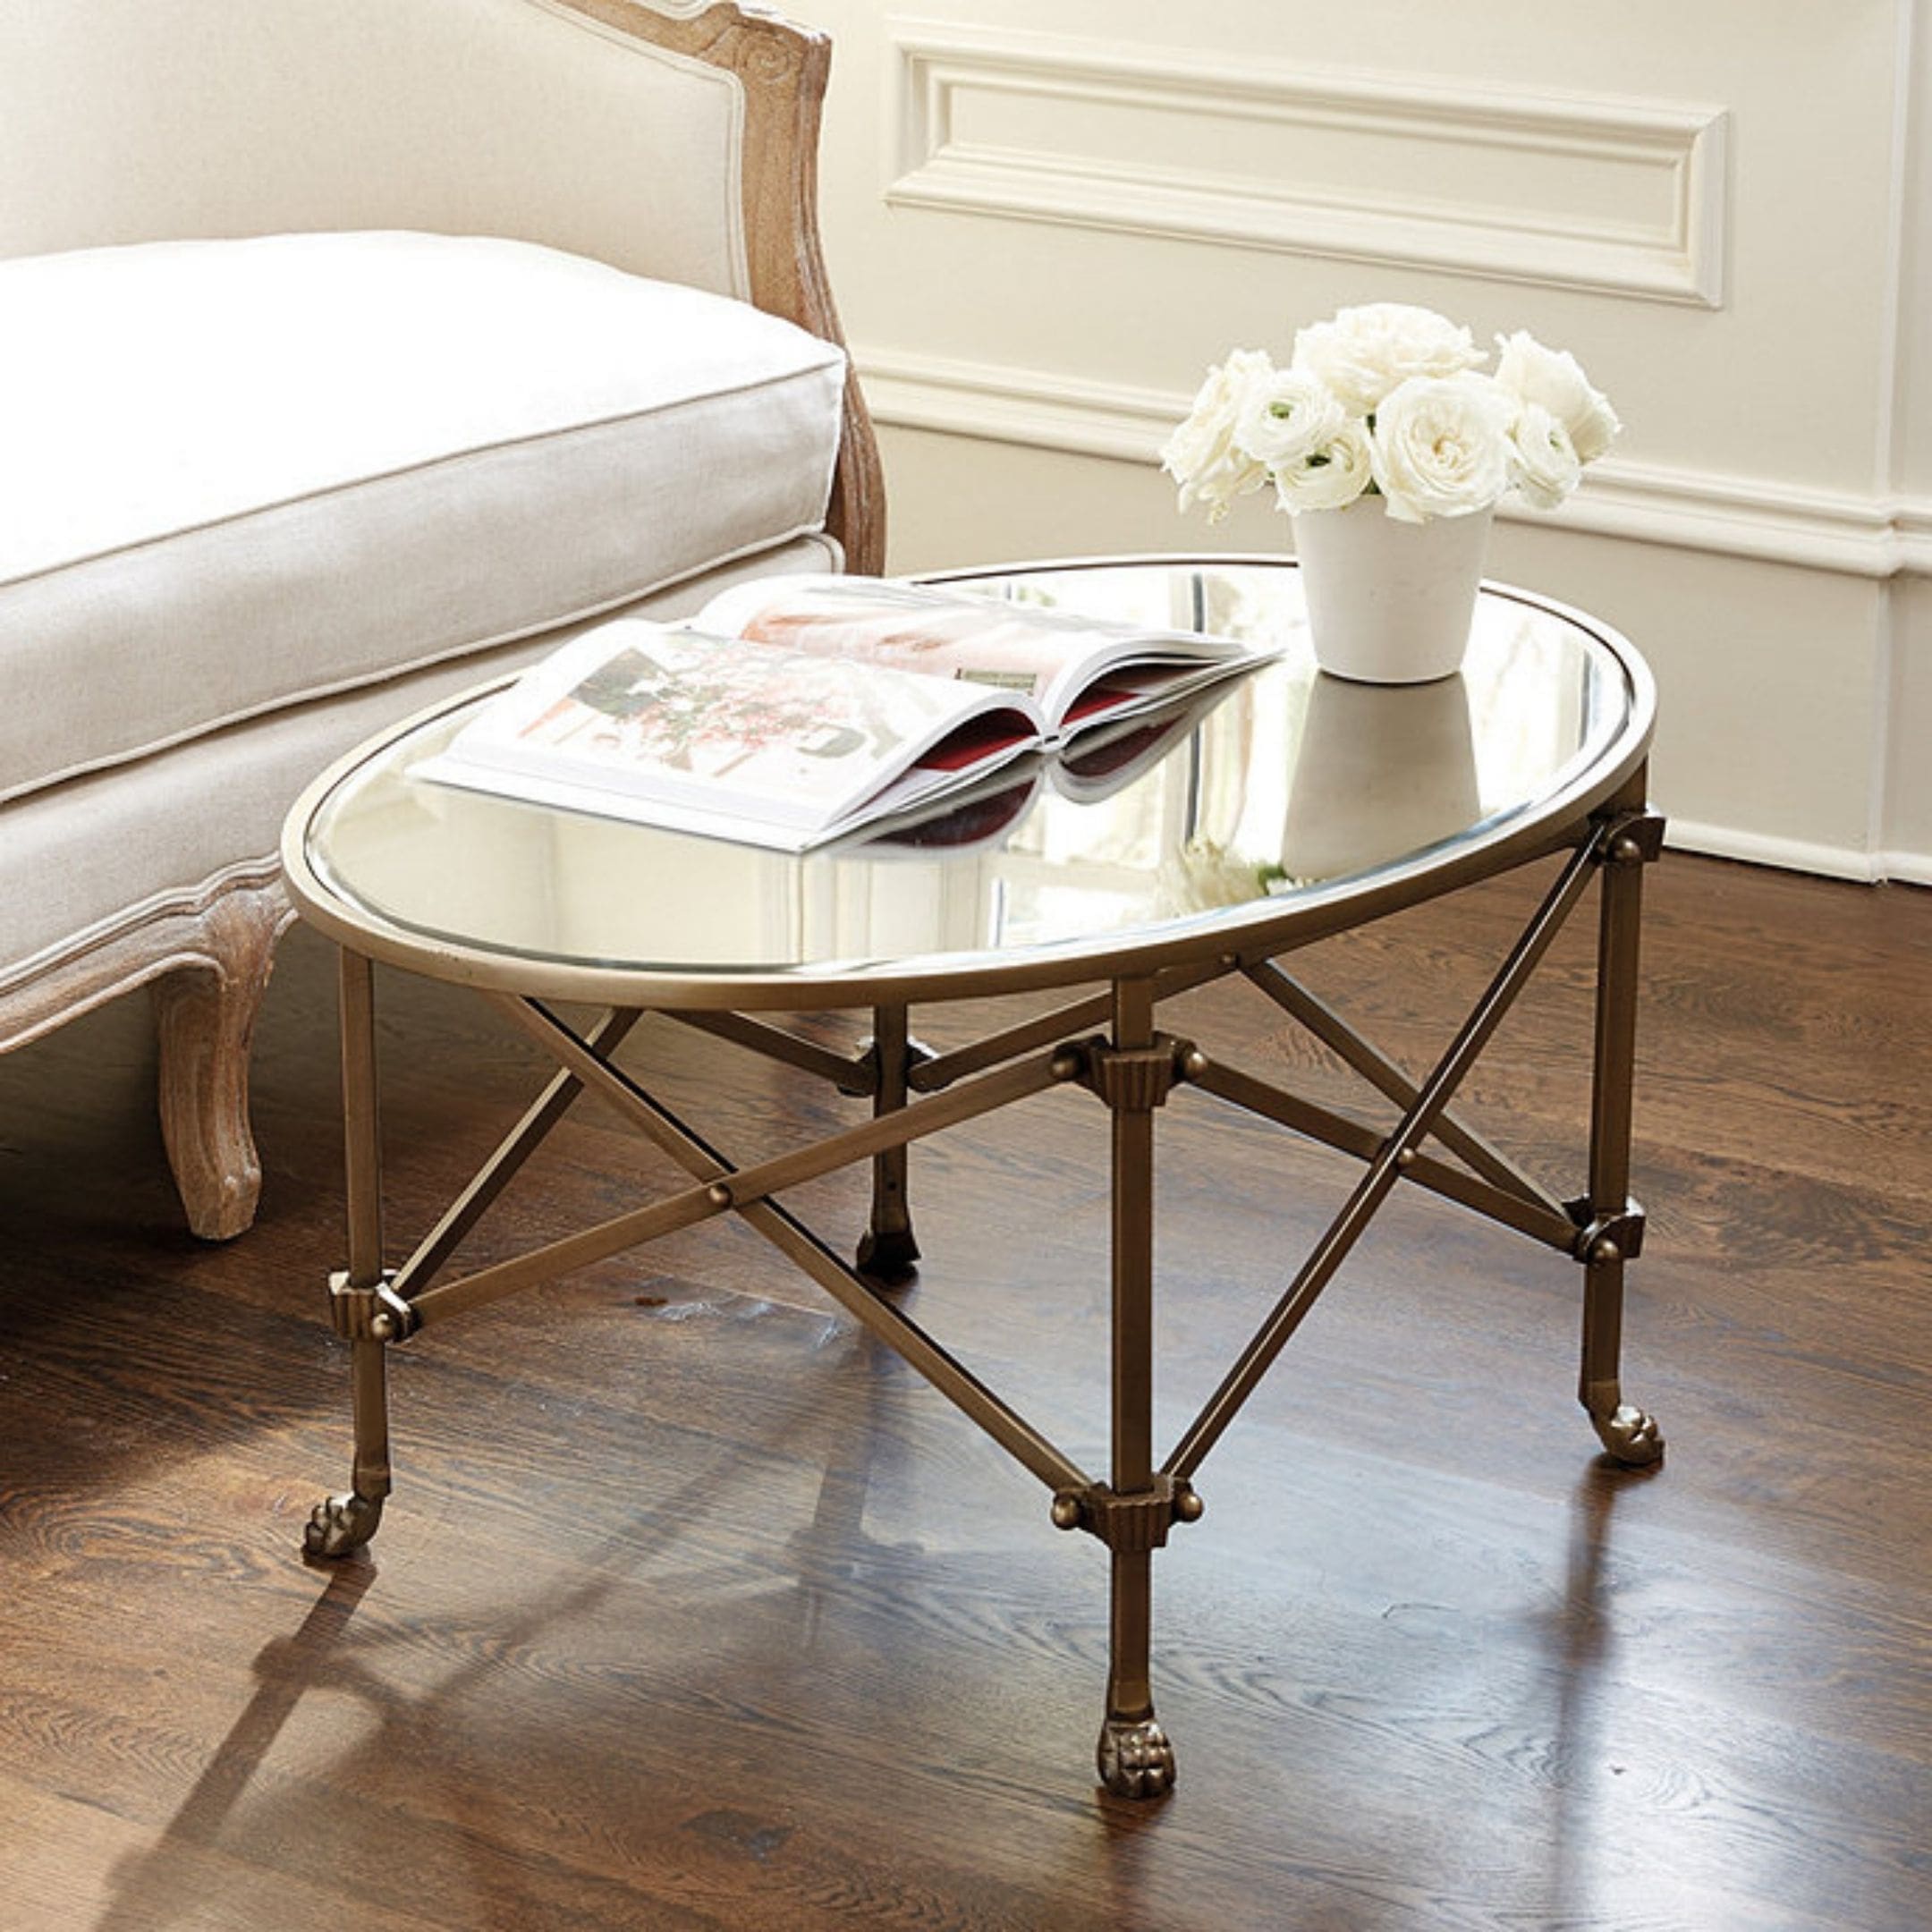 Mirrored Coffee Table with glass top and vintage brass legs.